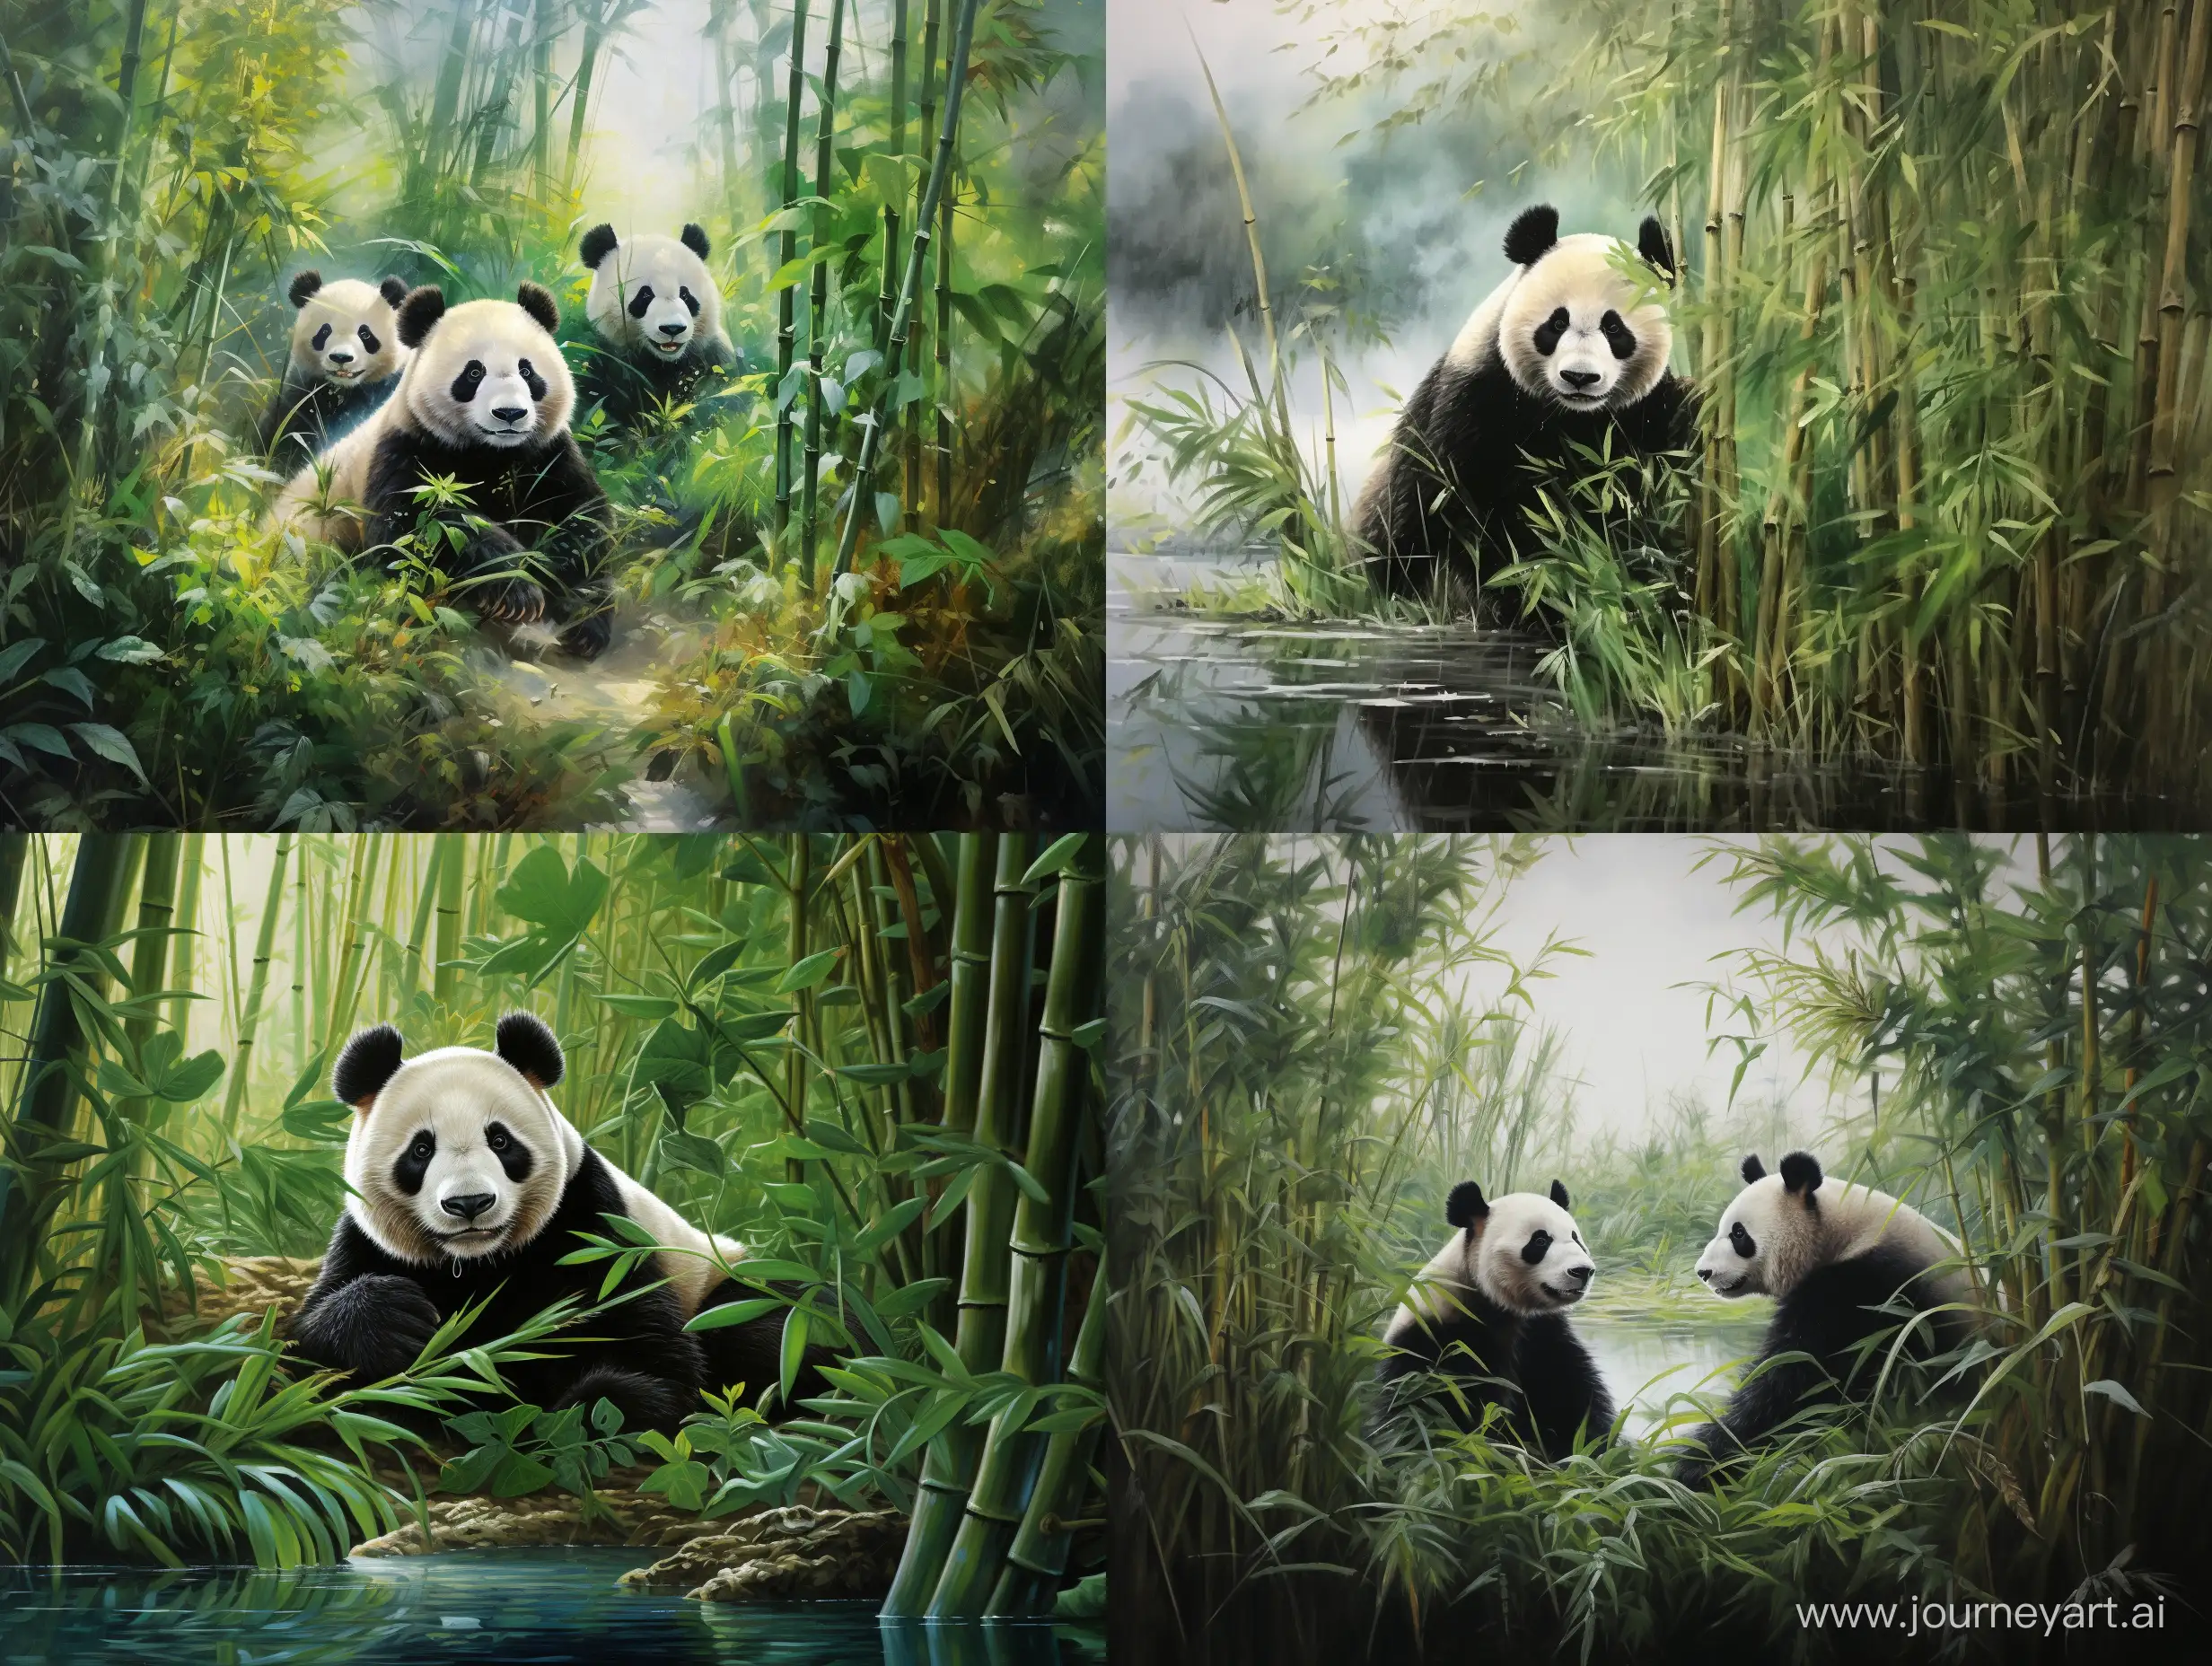 Enchanting-Pandas-in-a-Bamboo-Forest-Nature-Art